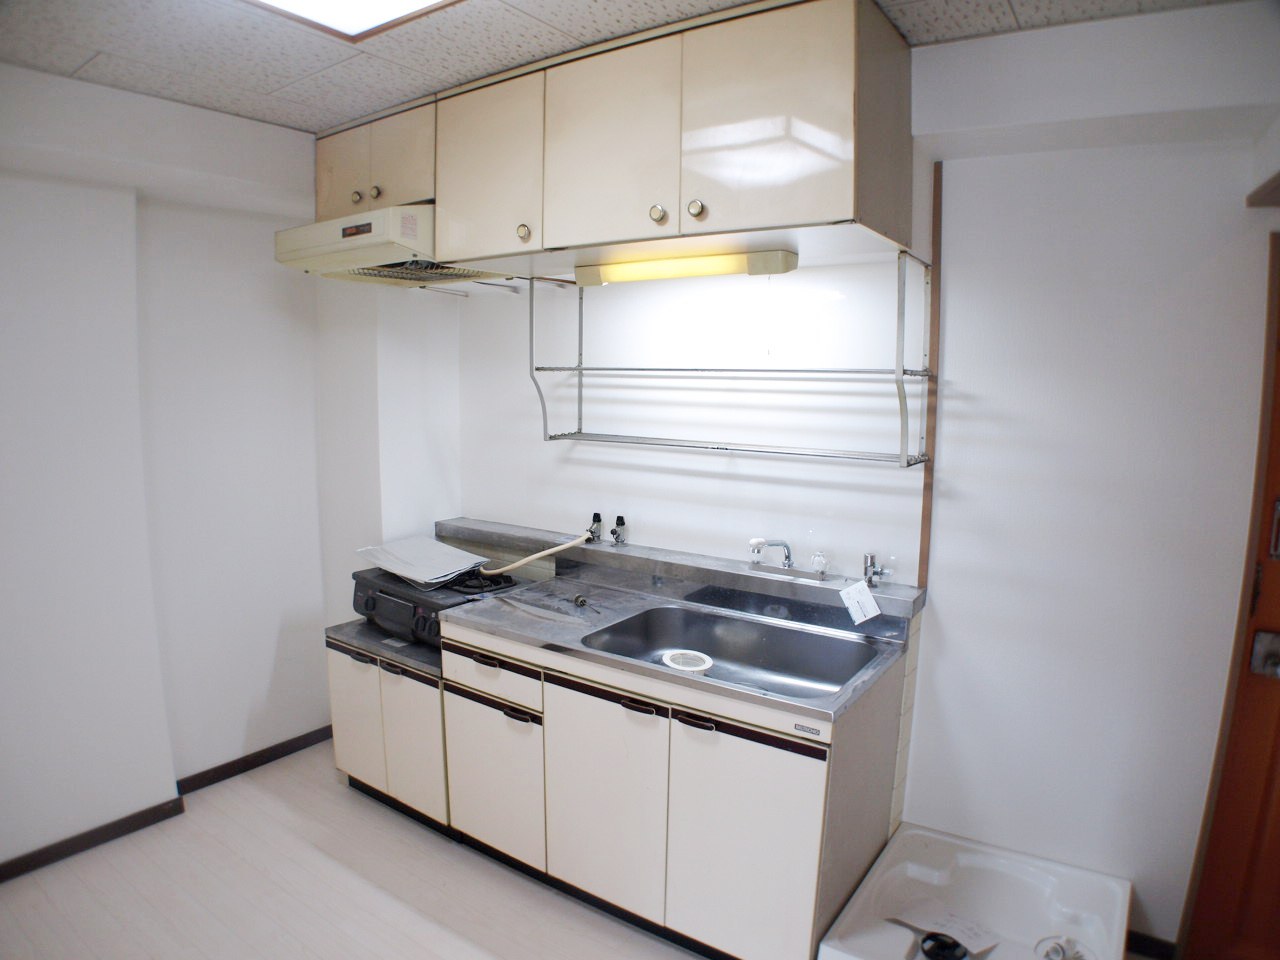 Kitchen. It comes with a gas stove!